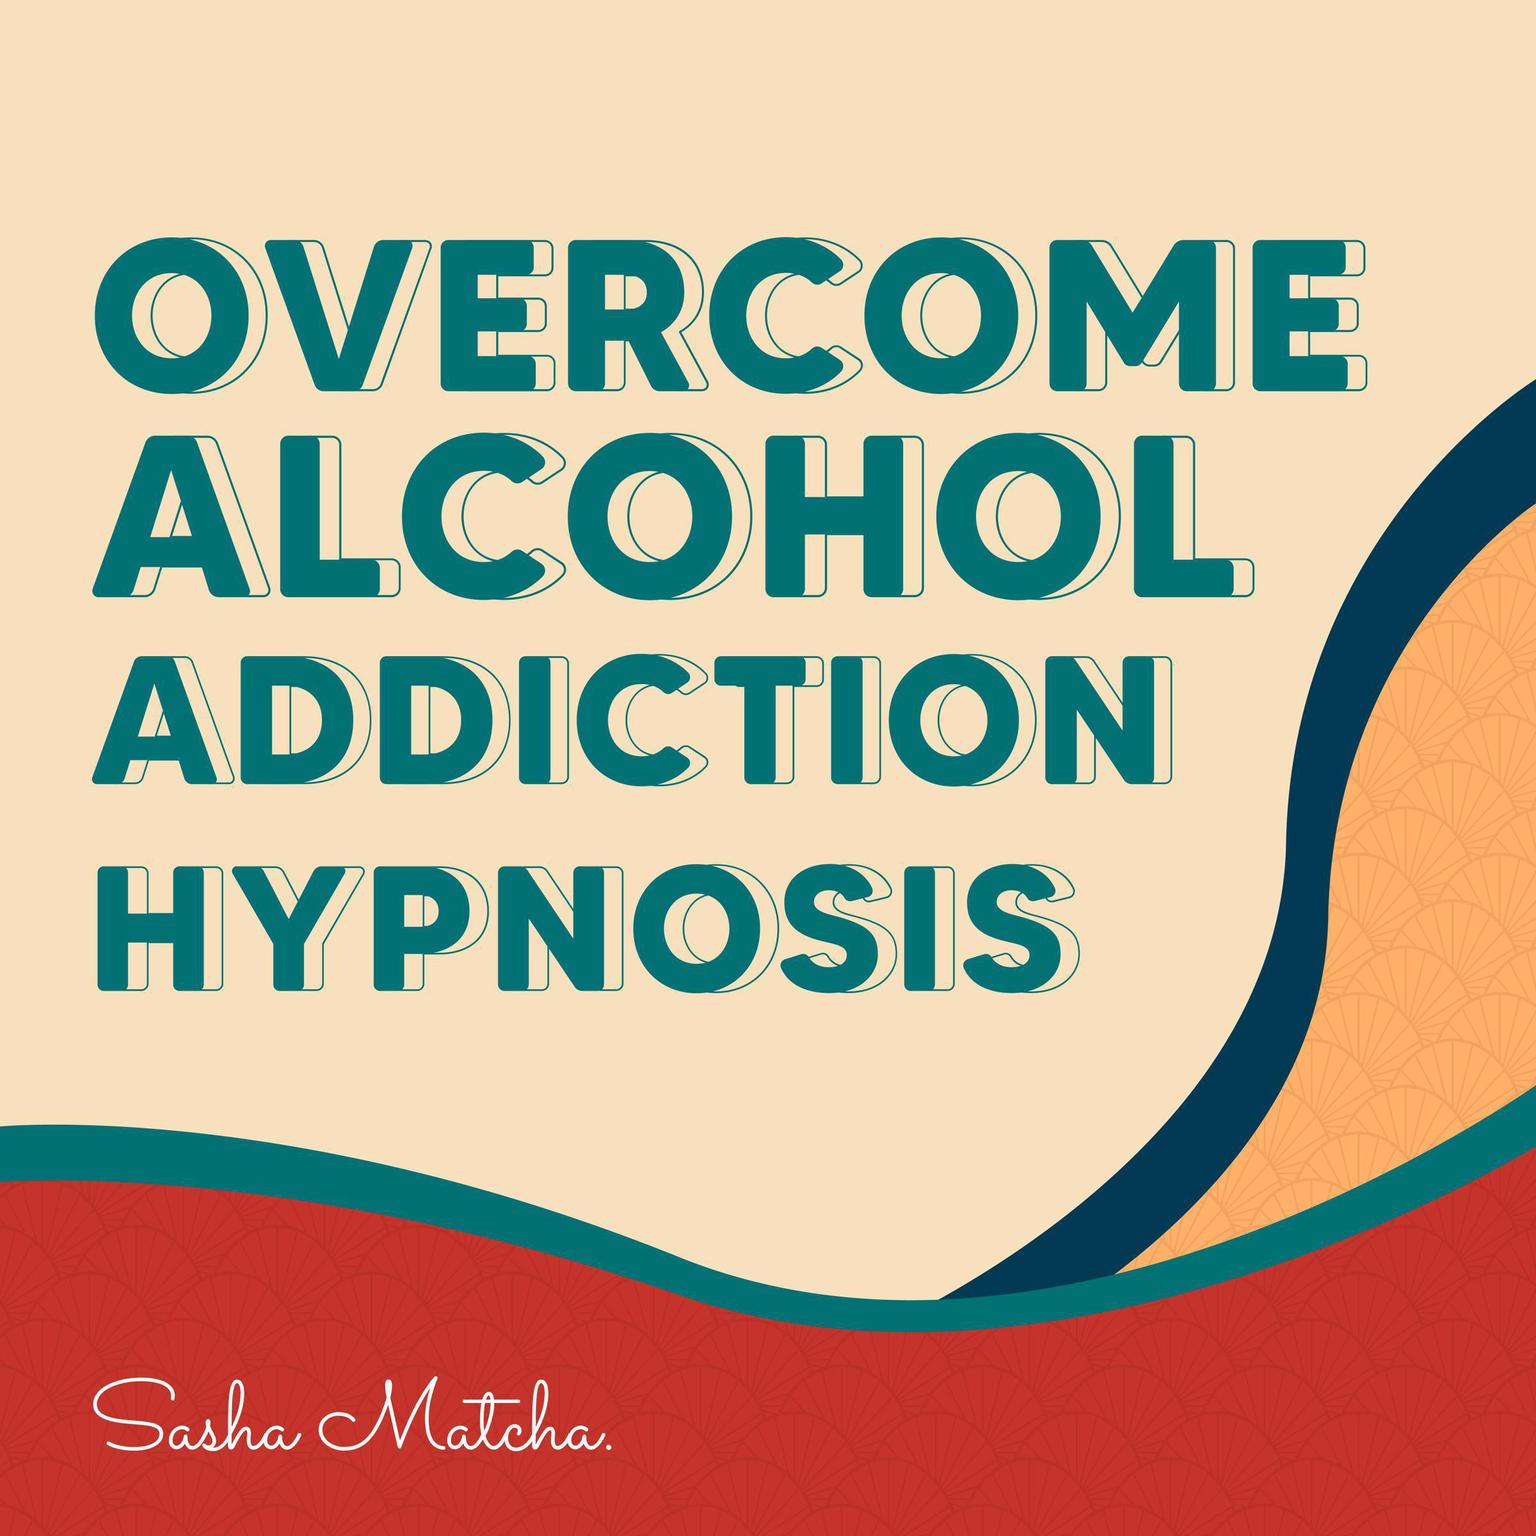 Overcome Alcohol Addiction Hypnosis: Quit Drinking with Hypnosis, Meditation and Subliminal Affirmations Audiobook, by Sasha Matcha